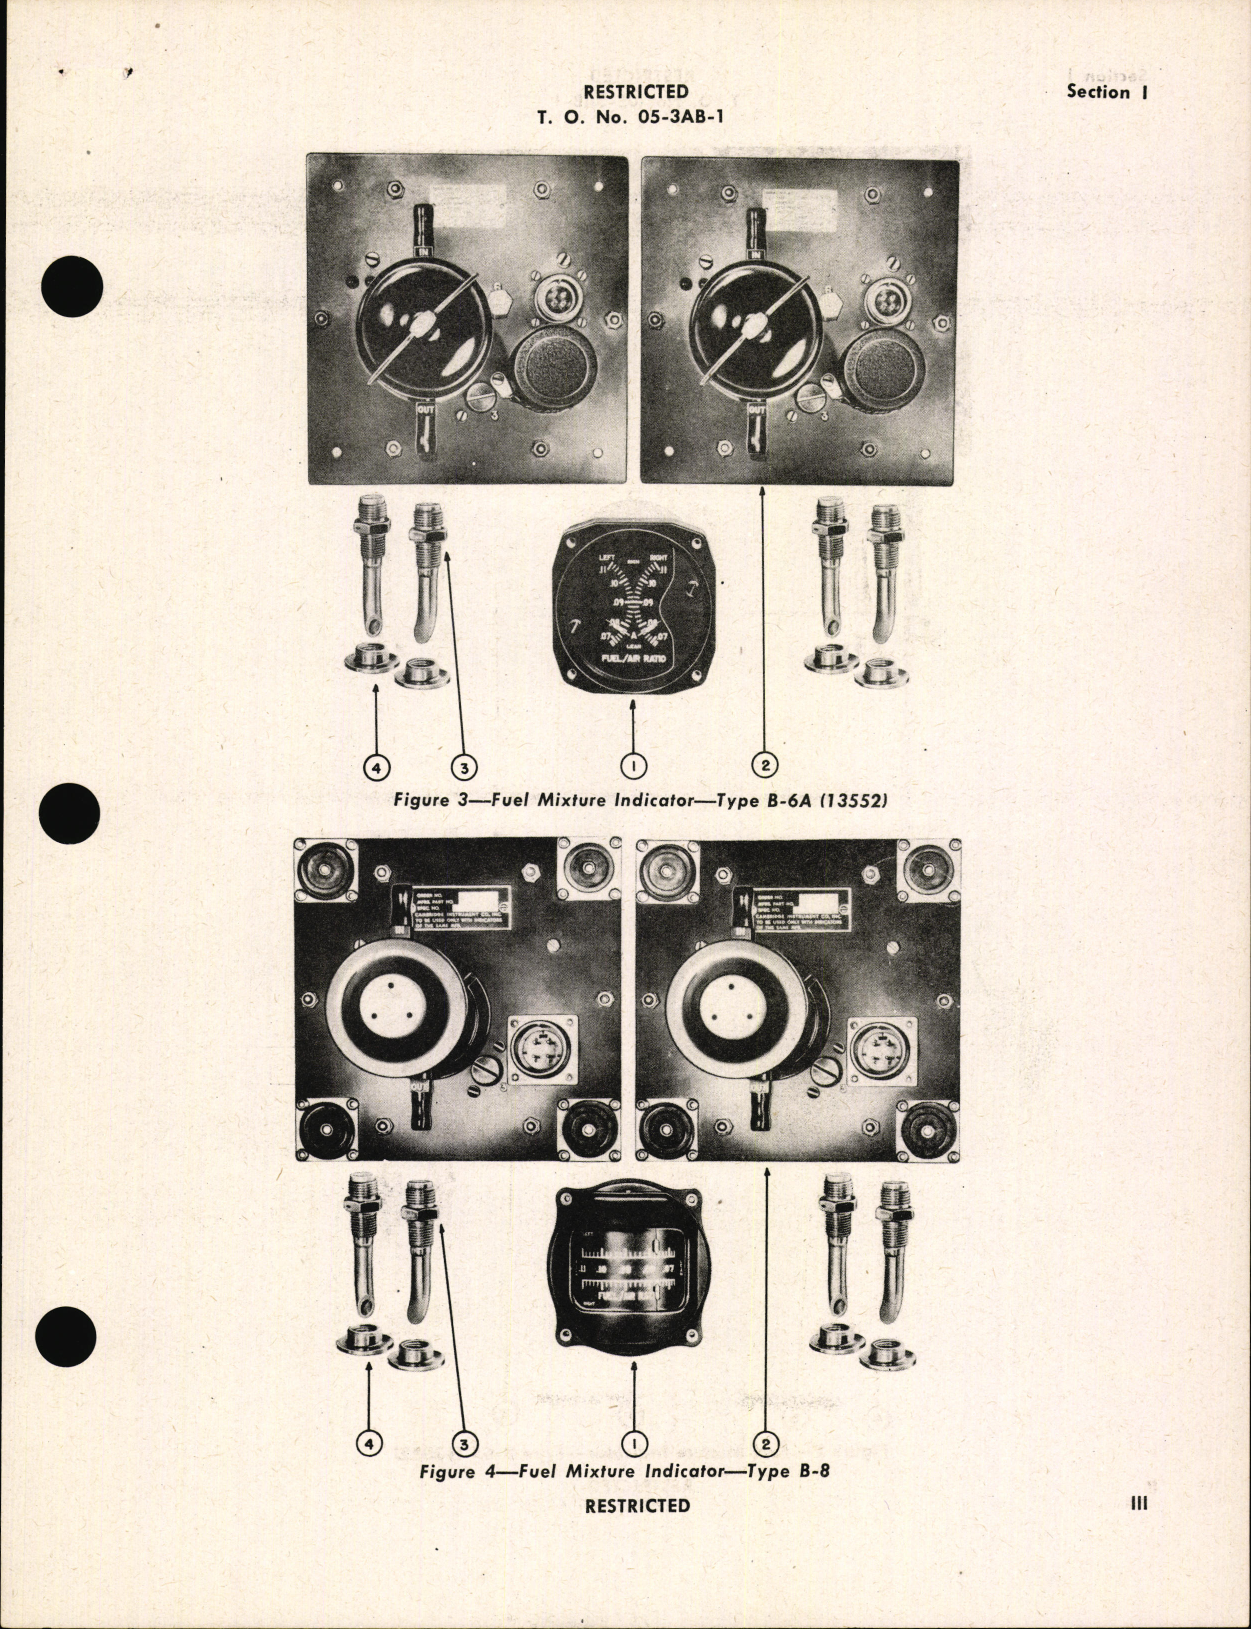 Sample page 5 from AirCorps Library document: Handbook of Instructions with Parts Catalog for Fuel Mixture Indicators